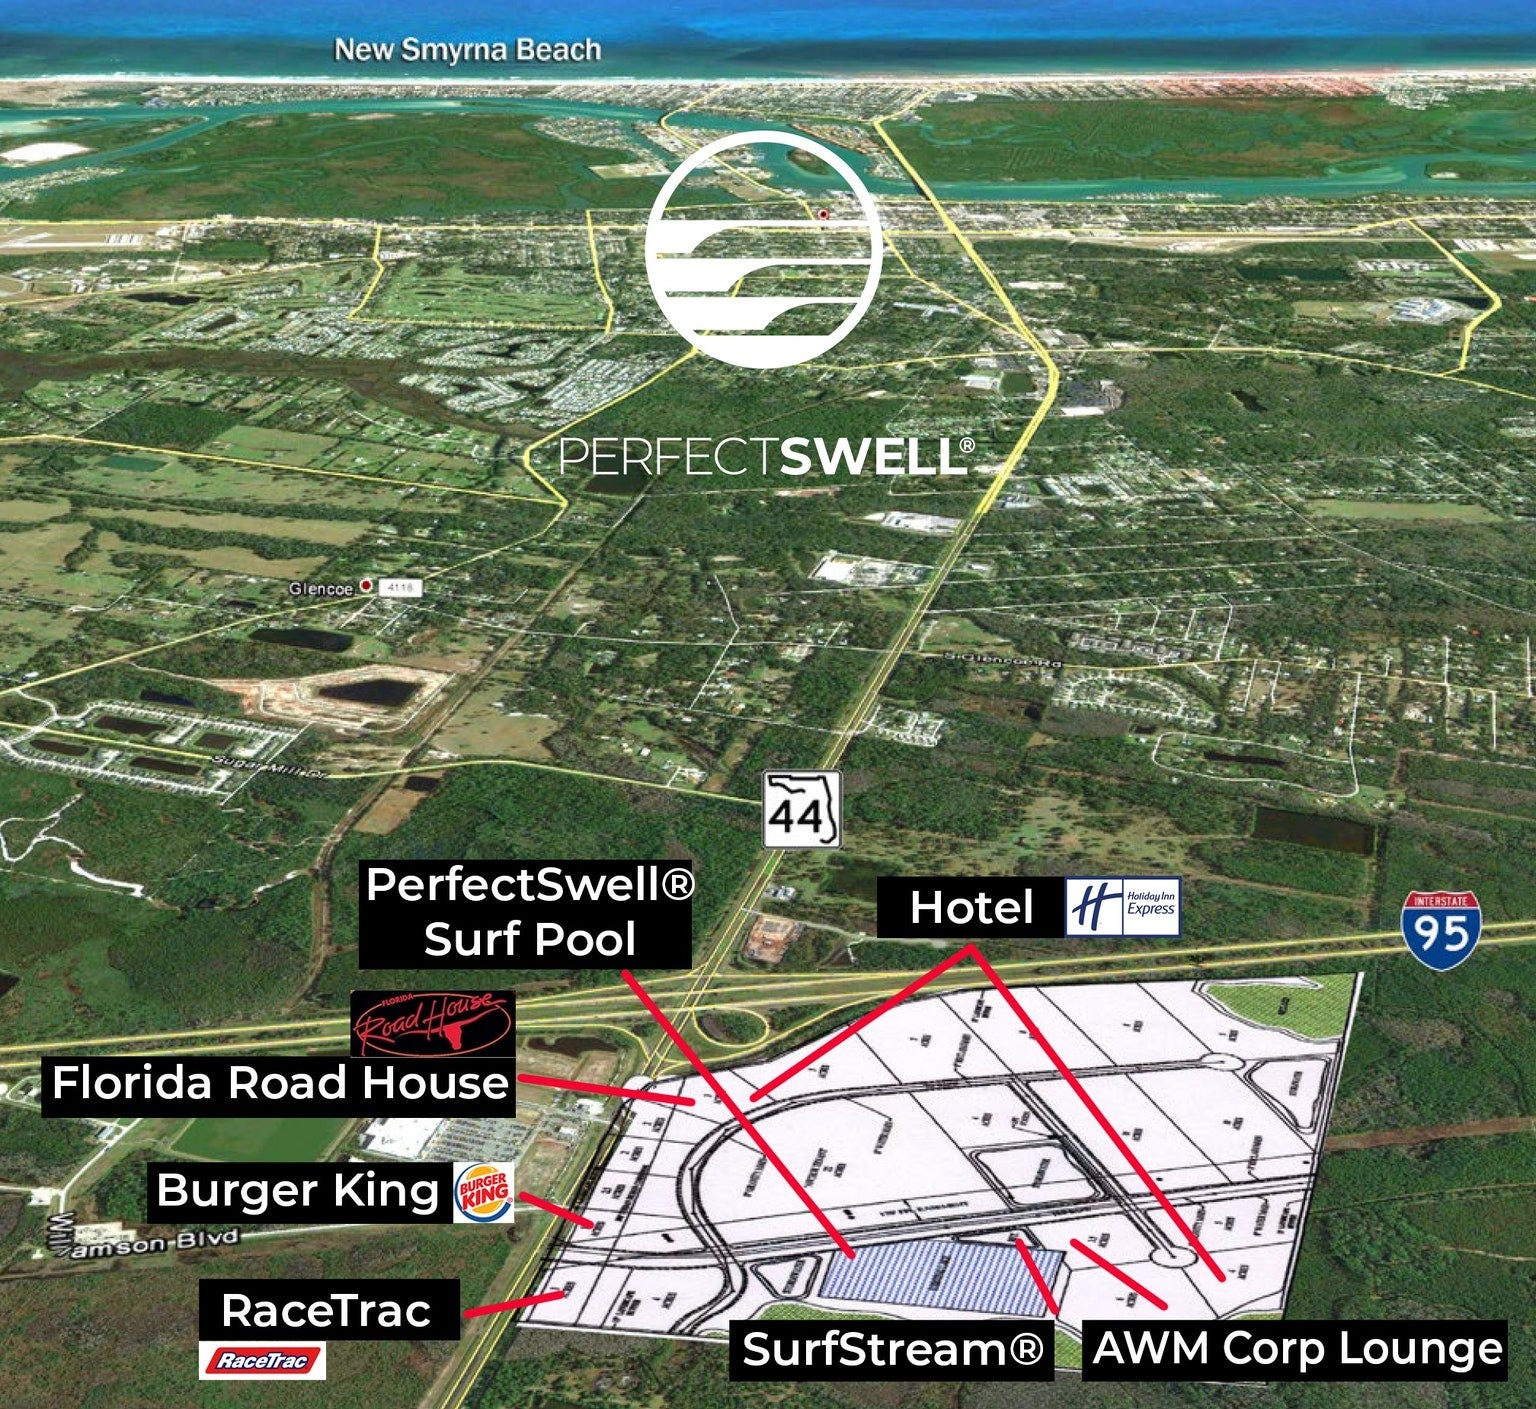 Wave Pool For Surfers Expected To Crest Into New Smyrna Beach In 22